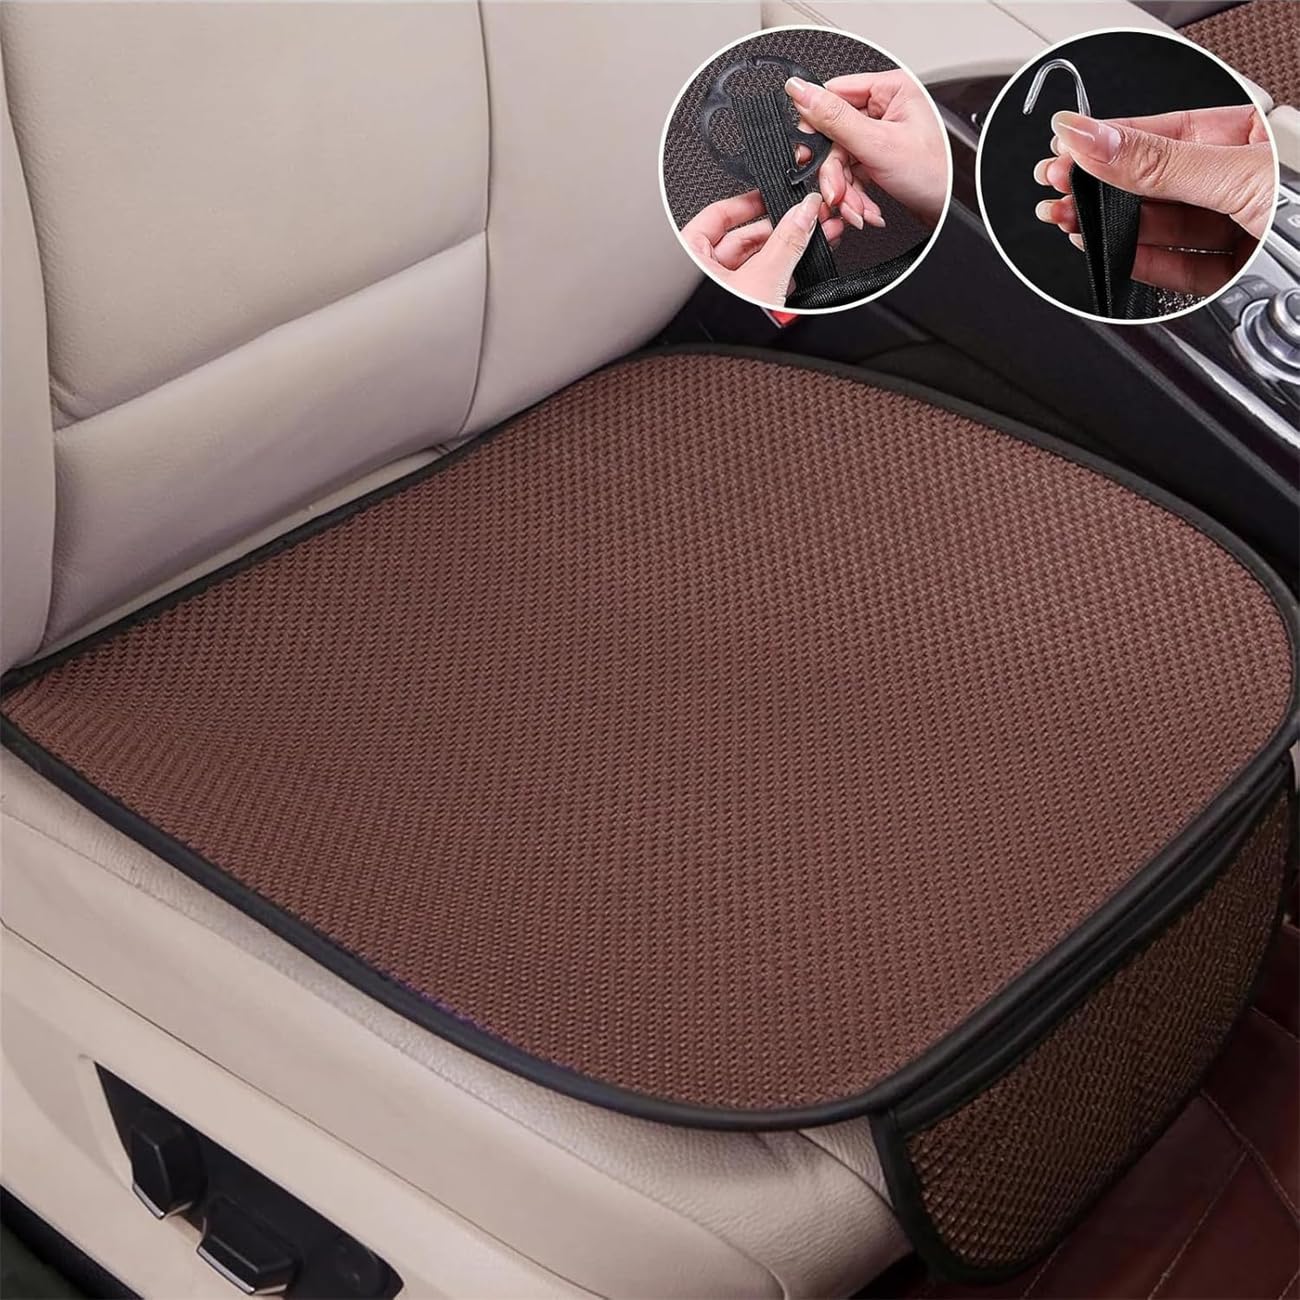 Vinxan Breathable & Anti-Slip Cotton Car Seat Covers,Ice Silk Non-slip Car Seat Pad for Summer Breathable and Refreshing,Ice Pack for Car Seat,Cooling Seat Covers for Cars (Brown, Front*2) von Vinxan